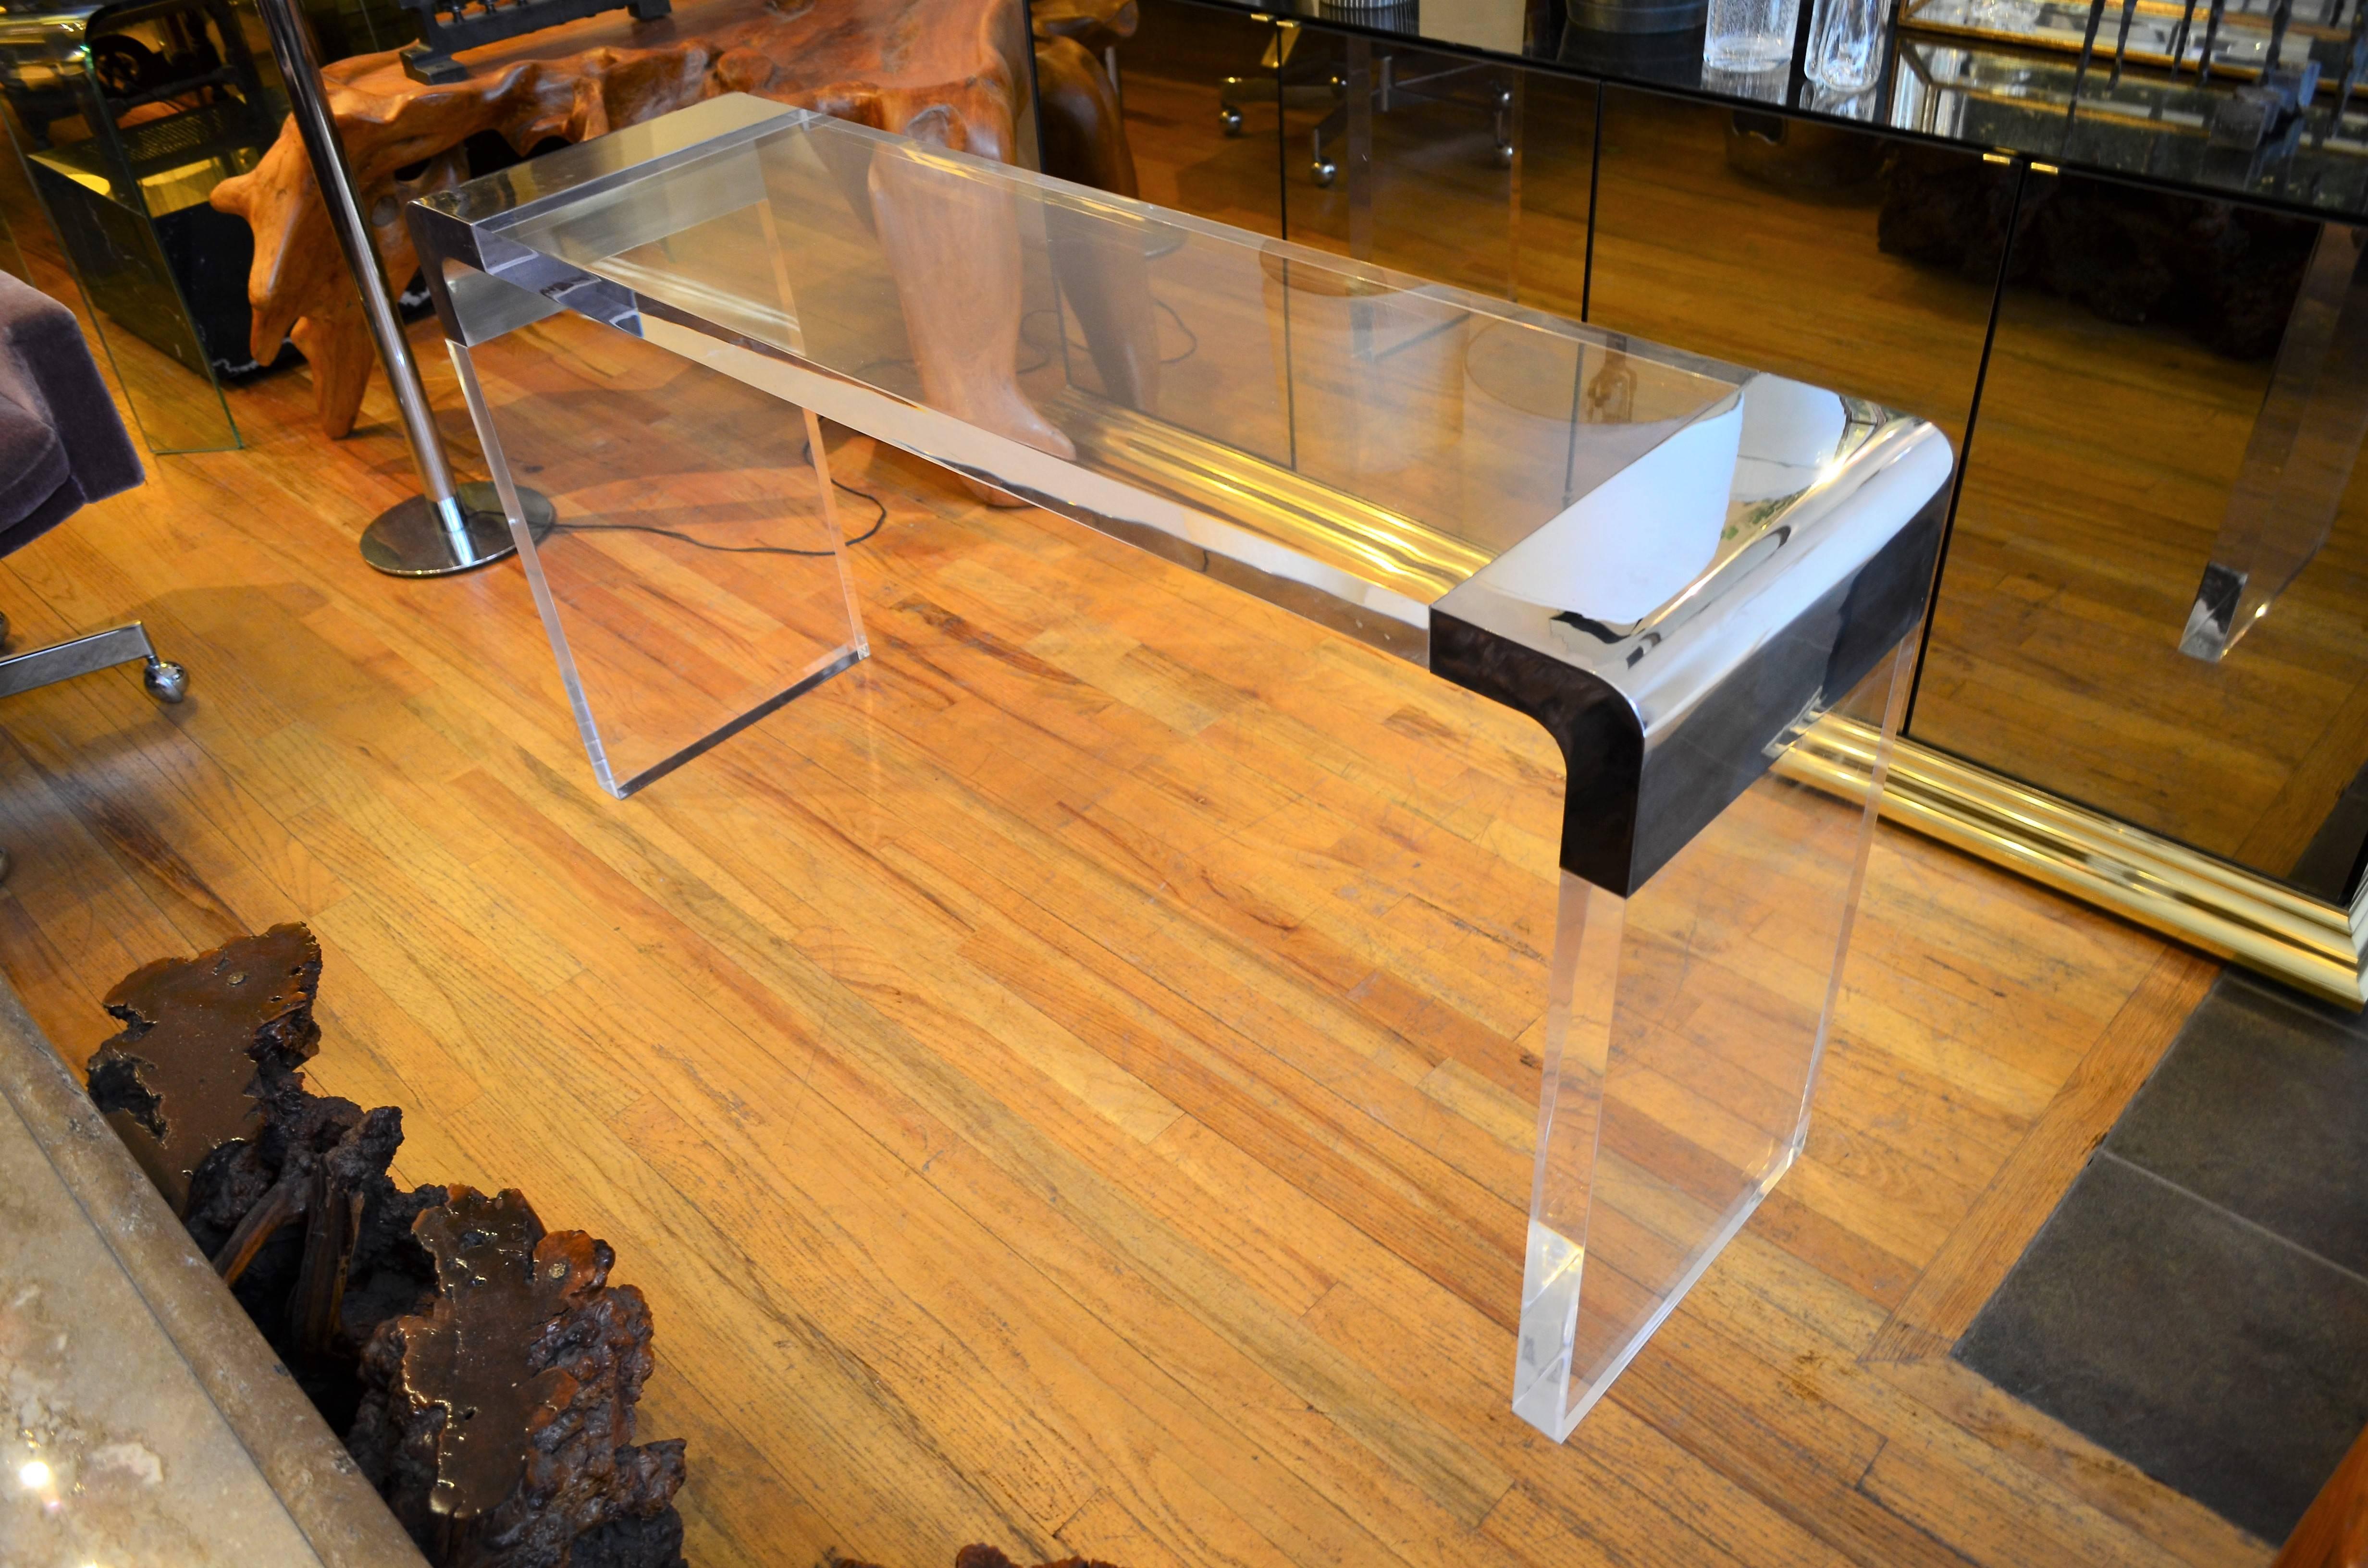 The finest 2 inch thick custom Lucite waterfall console table in the manner of Charles Hollis Jones. The substantial chrome ends are reminiscent of the Classic Pace tables. The table is in very good condition.